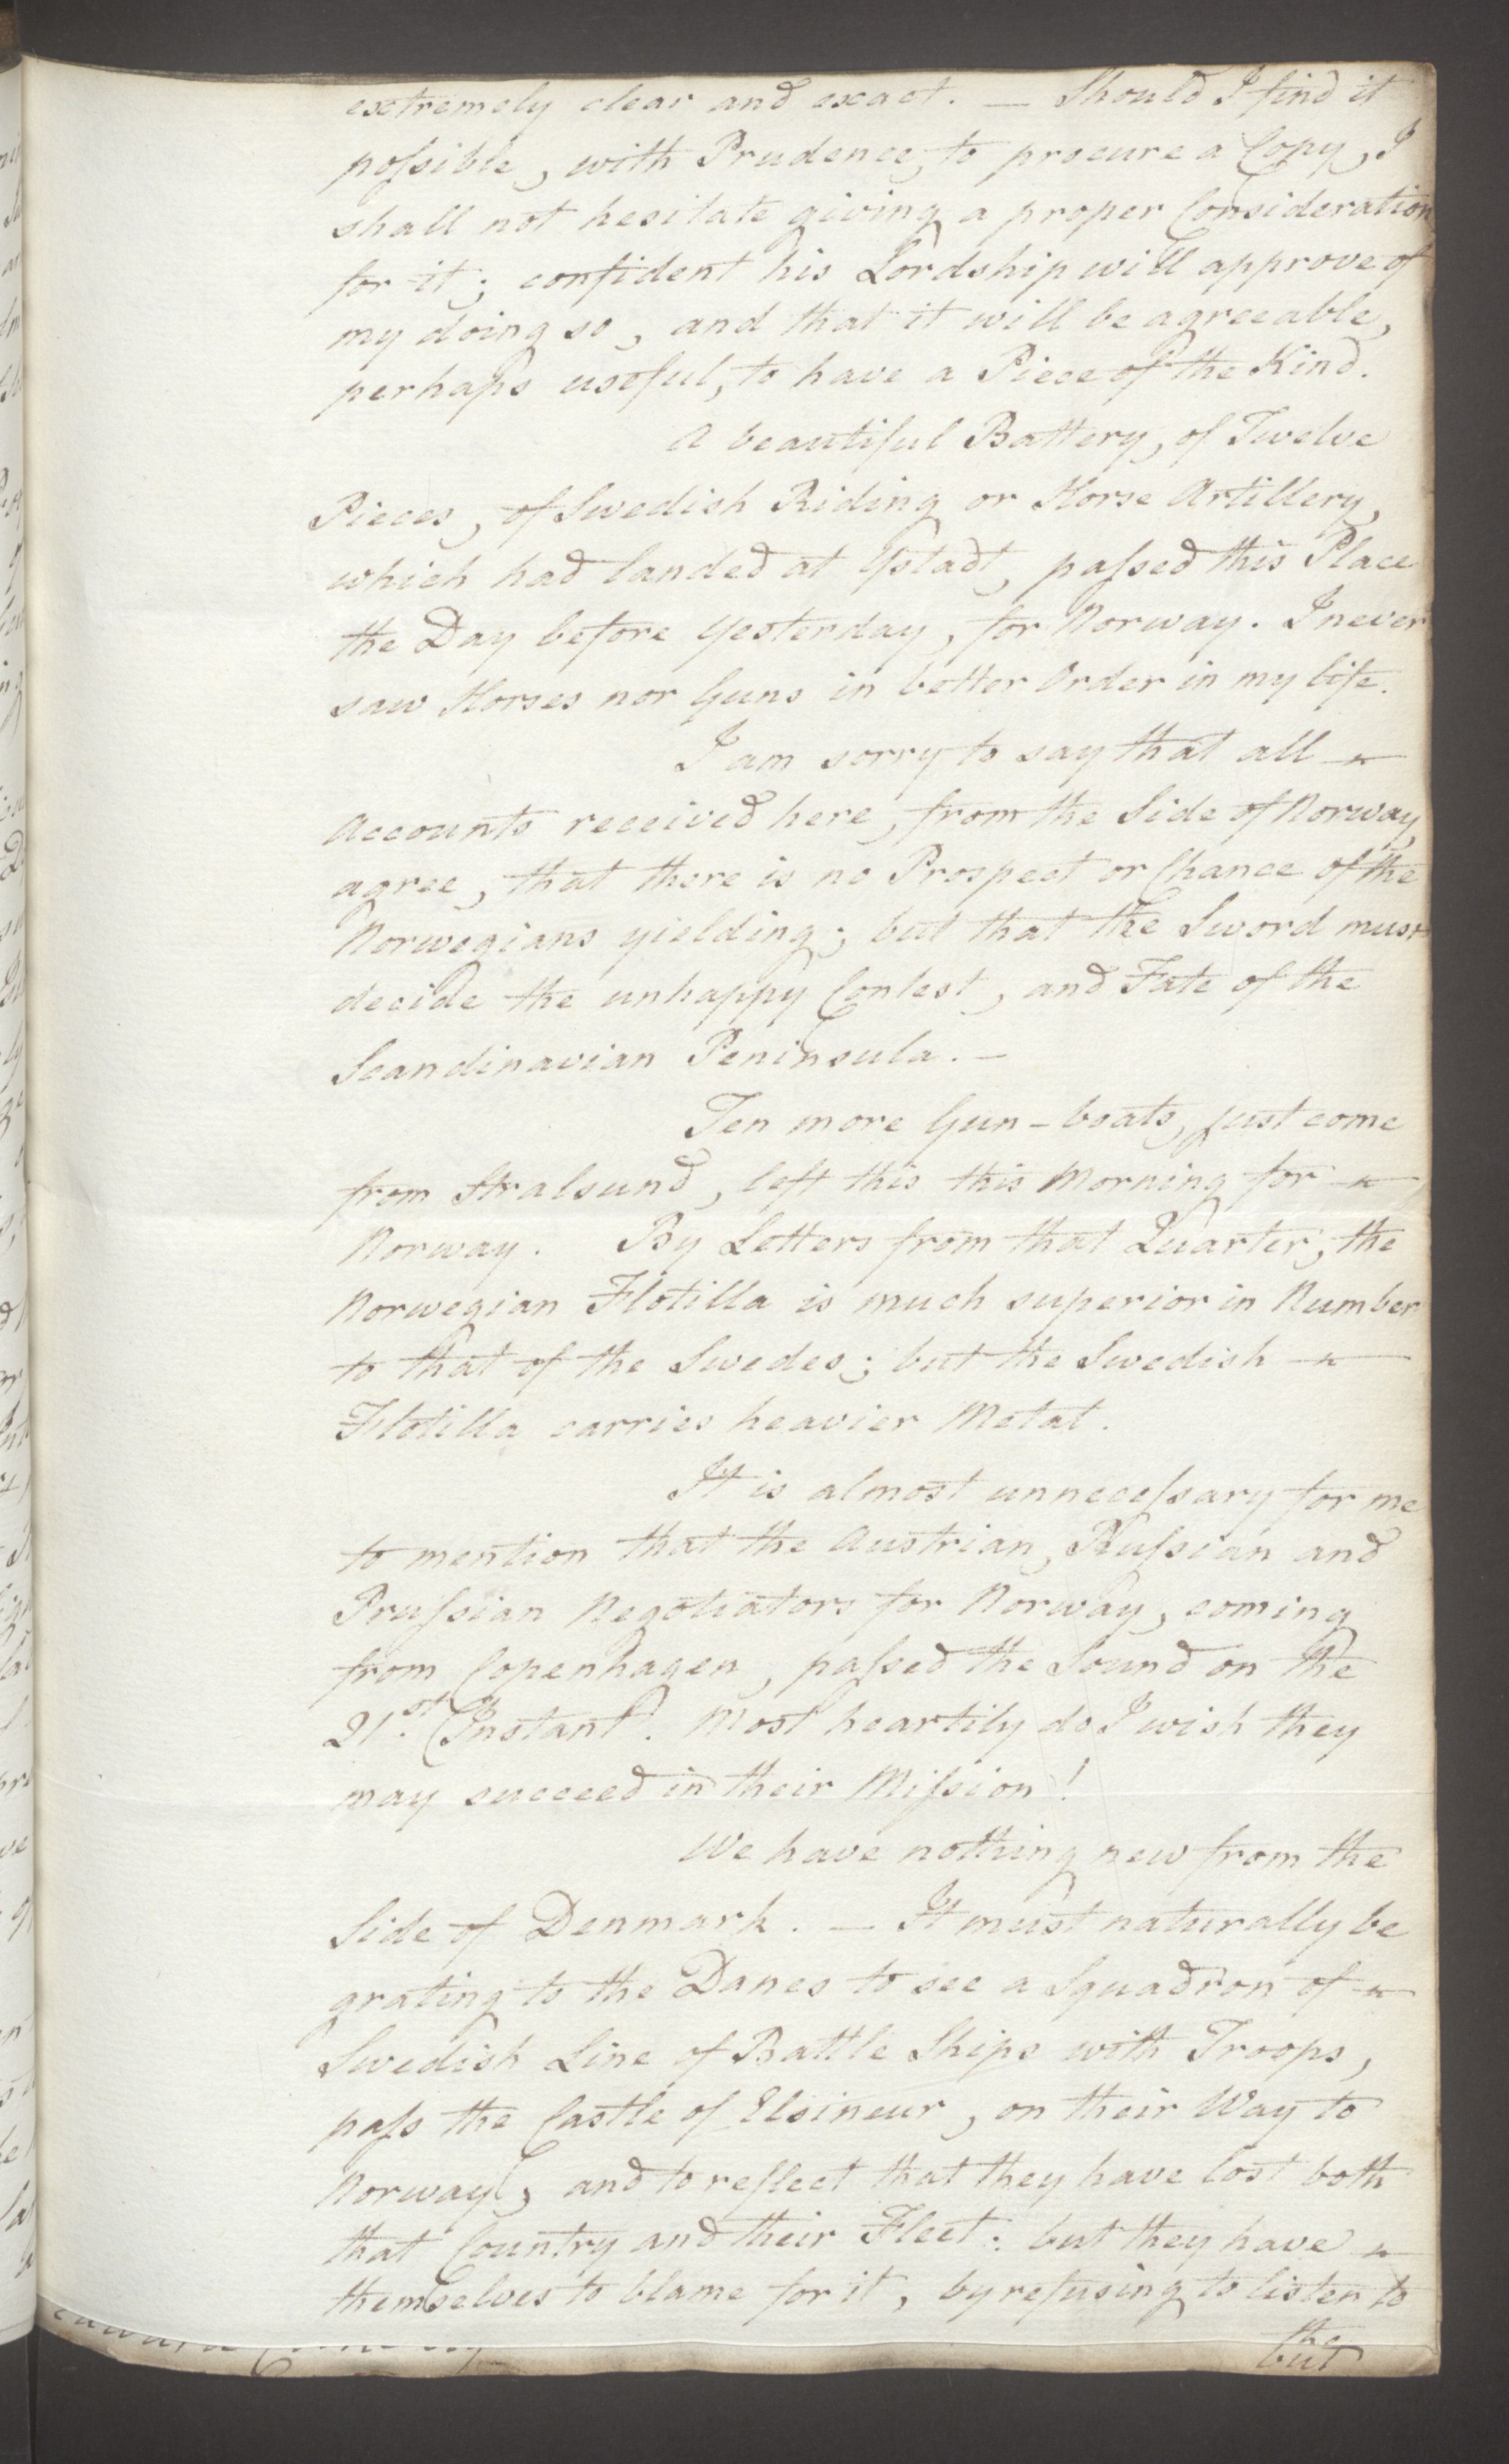 Foreign Office*, UKA/-/FO 38/16: Sir C. Gordon. Reports from Malmö, Jonkoping, and Helsingborg, 1814, s. 69